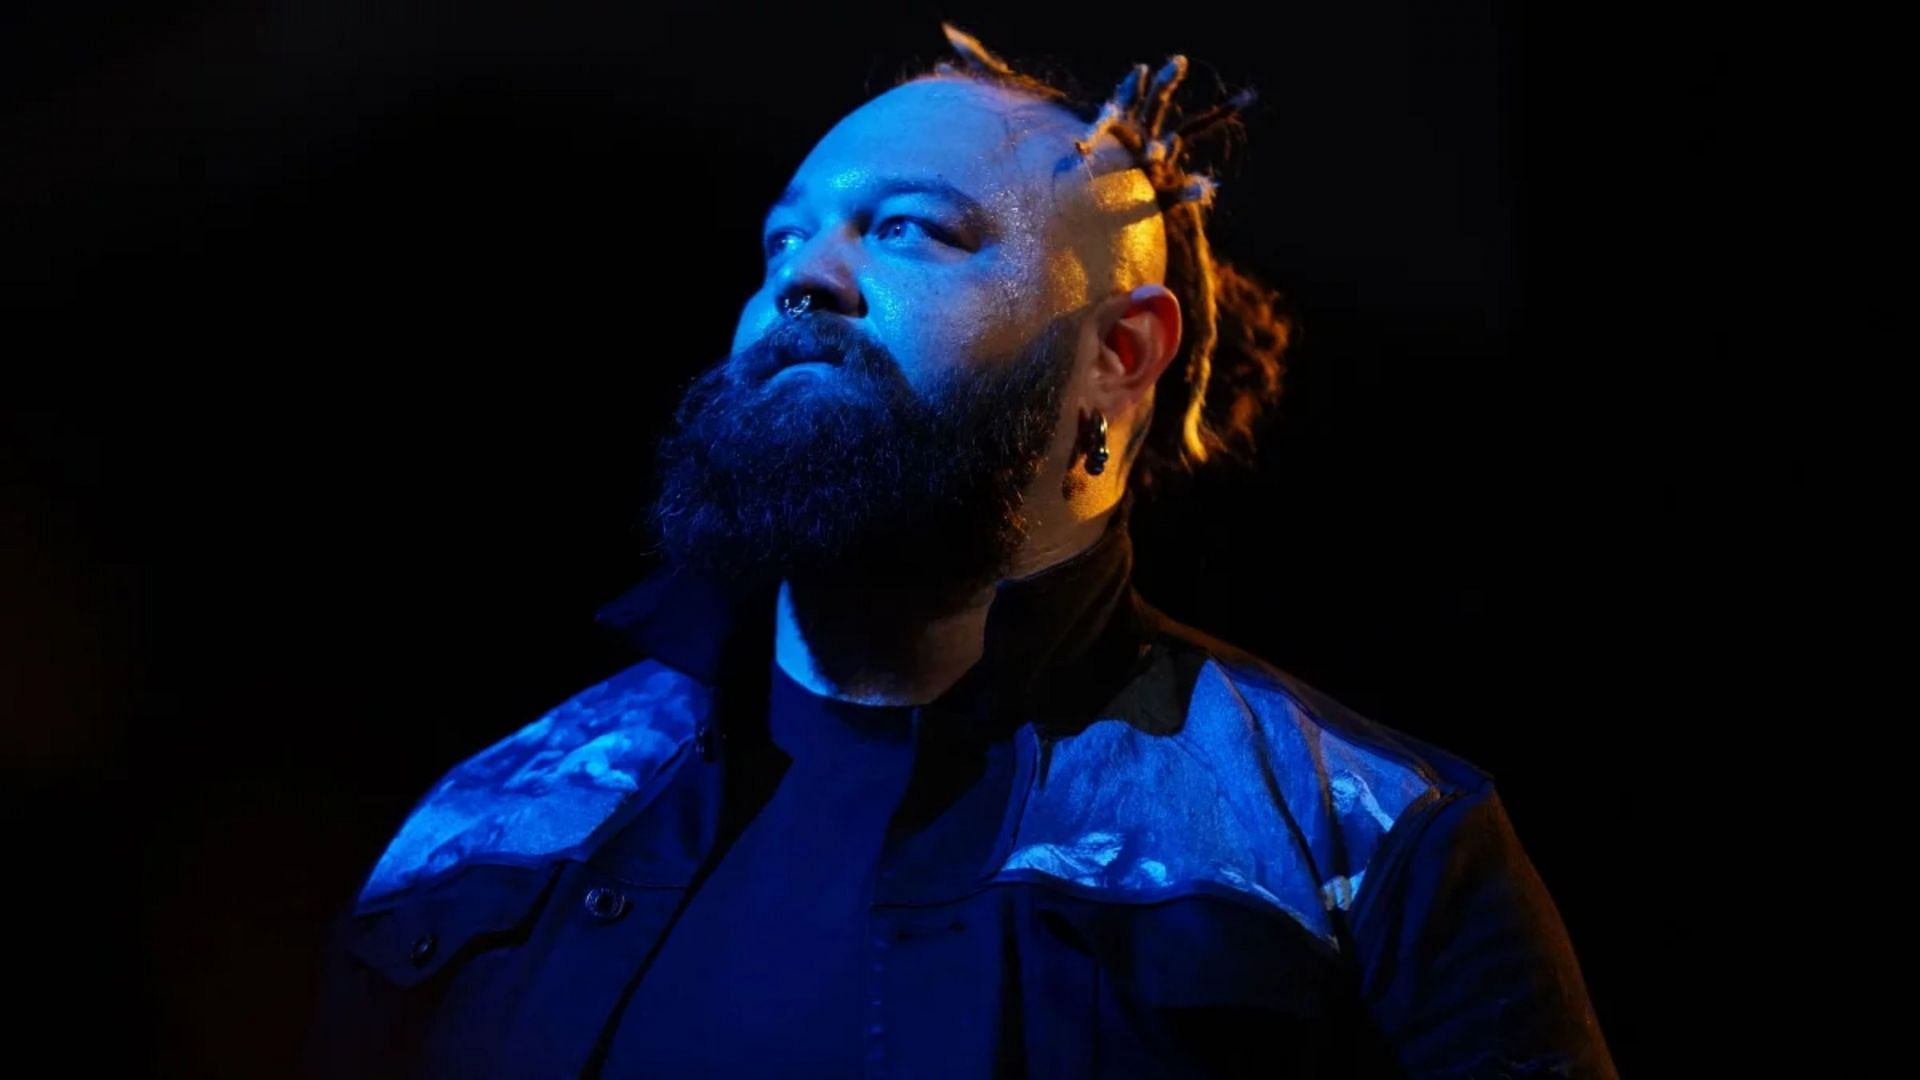 Bray Wyatt has not competed in WWE since January